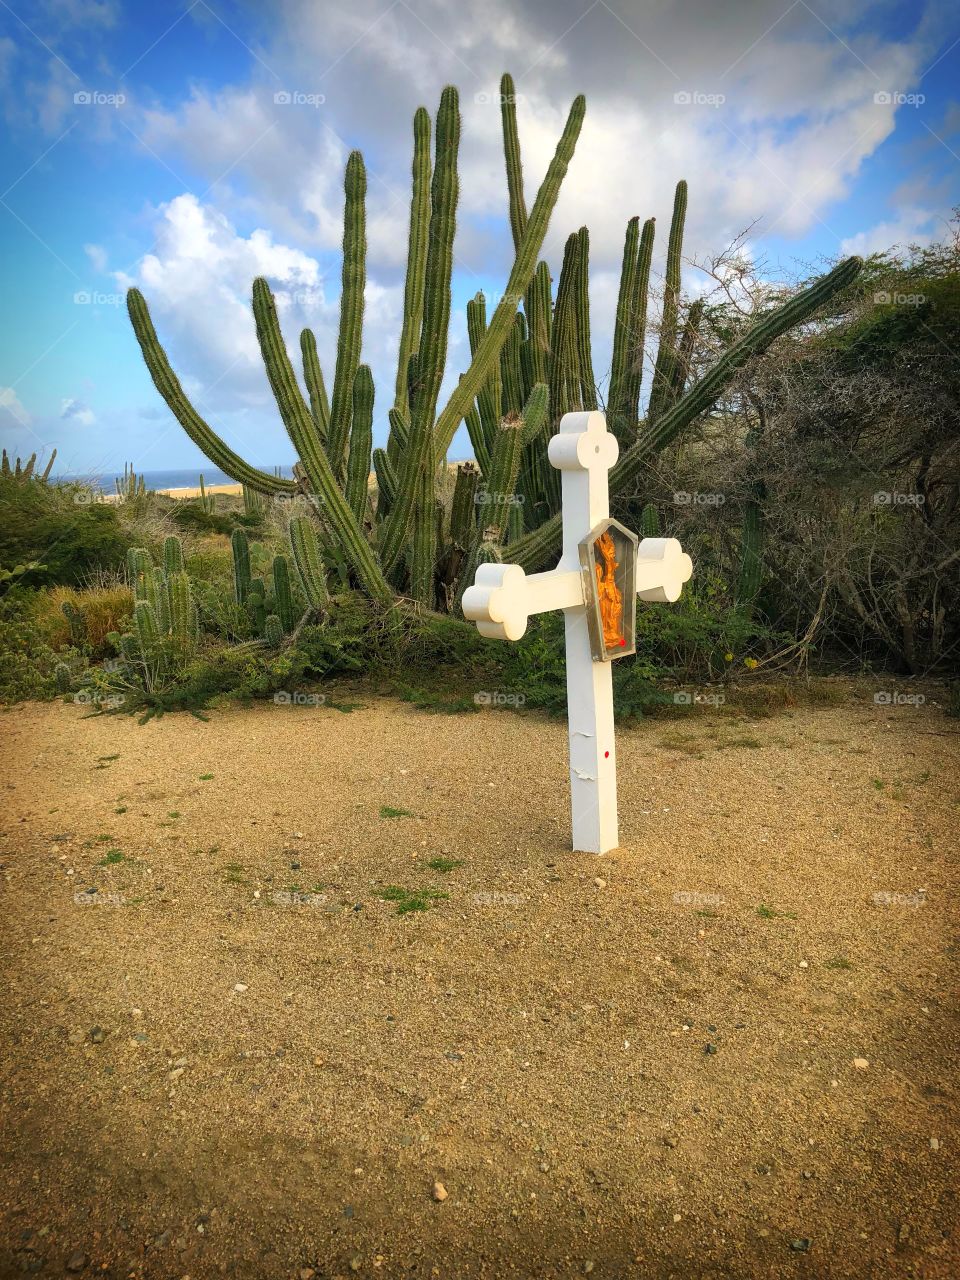 Church cross, cactus in background in Aruba during our UTV excursion with Carnival Sunshine Cruise 2018